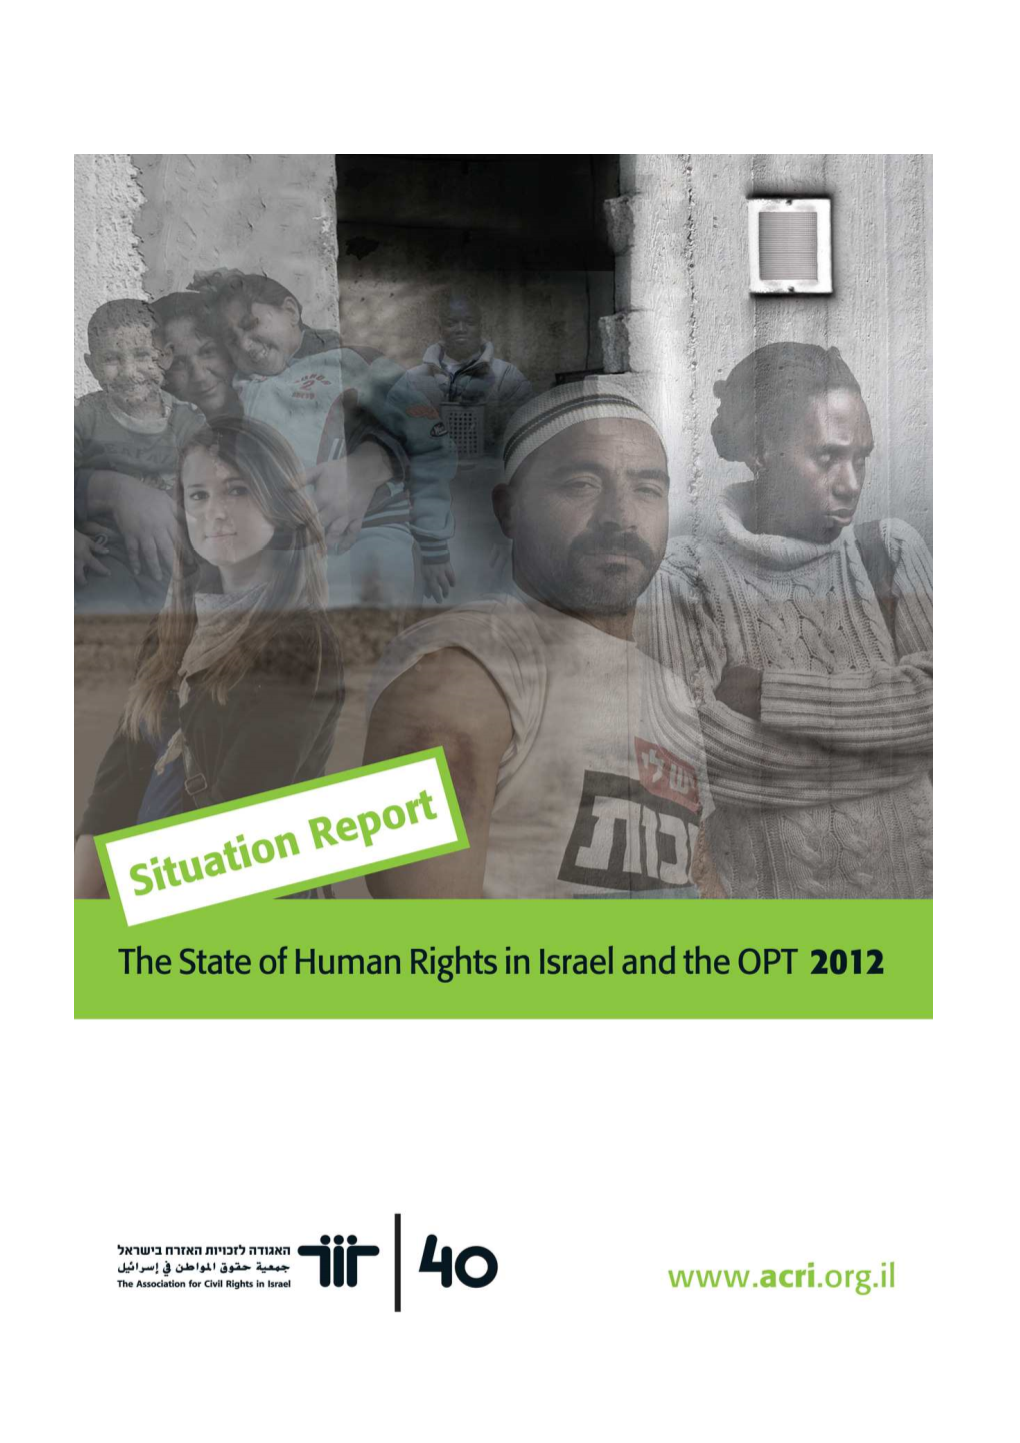 ACRI-Situation-Report-2012-ENG.Pdf